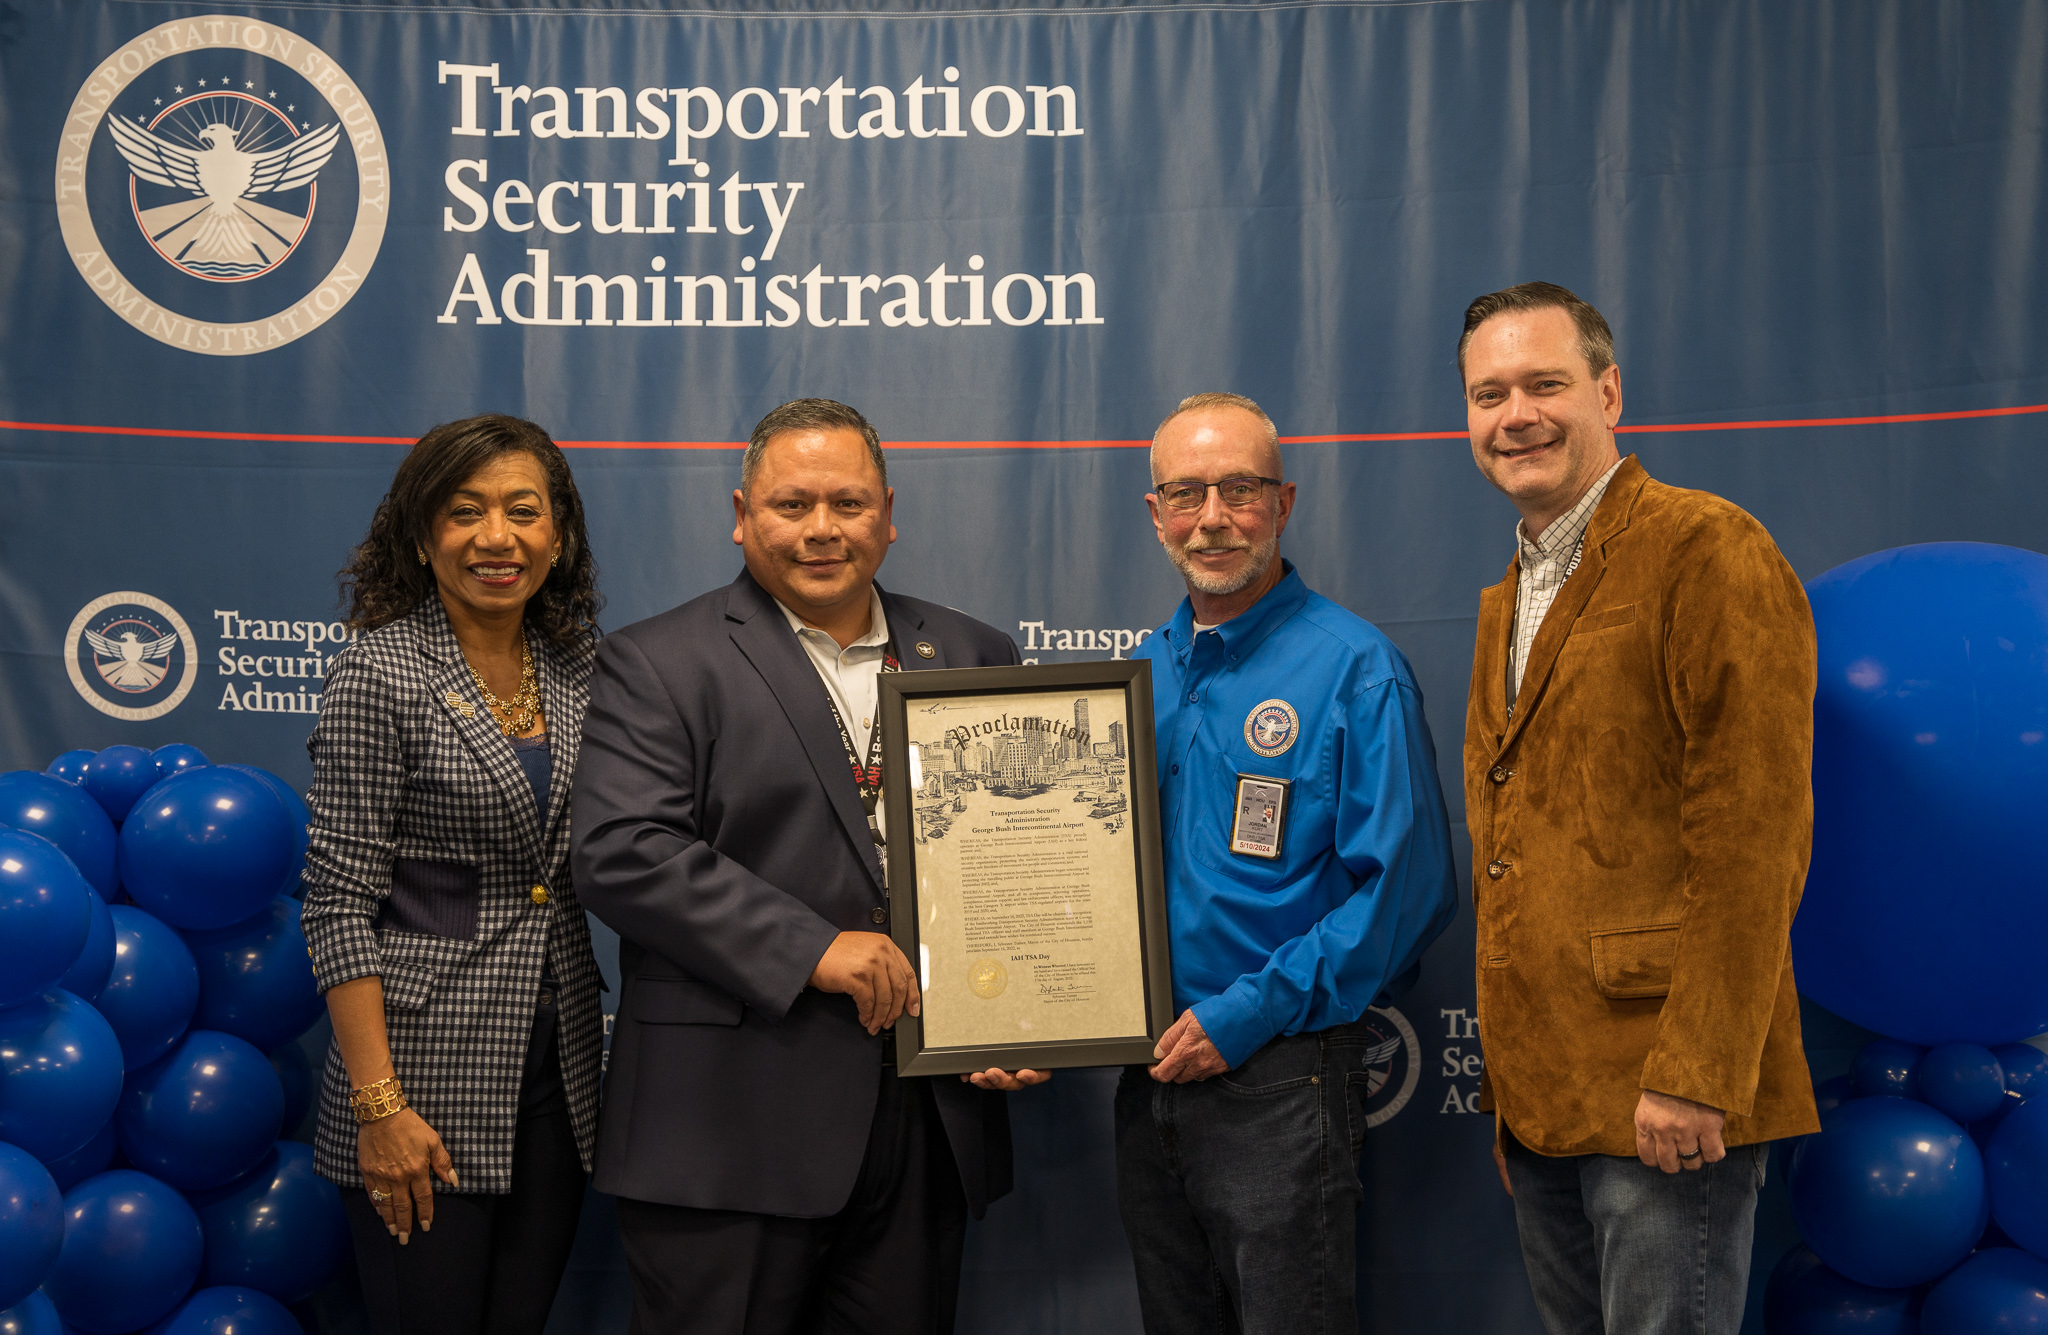 Members of Houston Airports and TSA pose for photo with City of Houston Proclamation